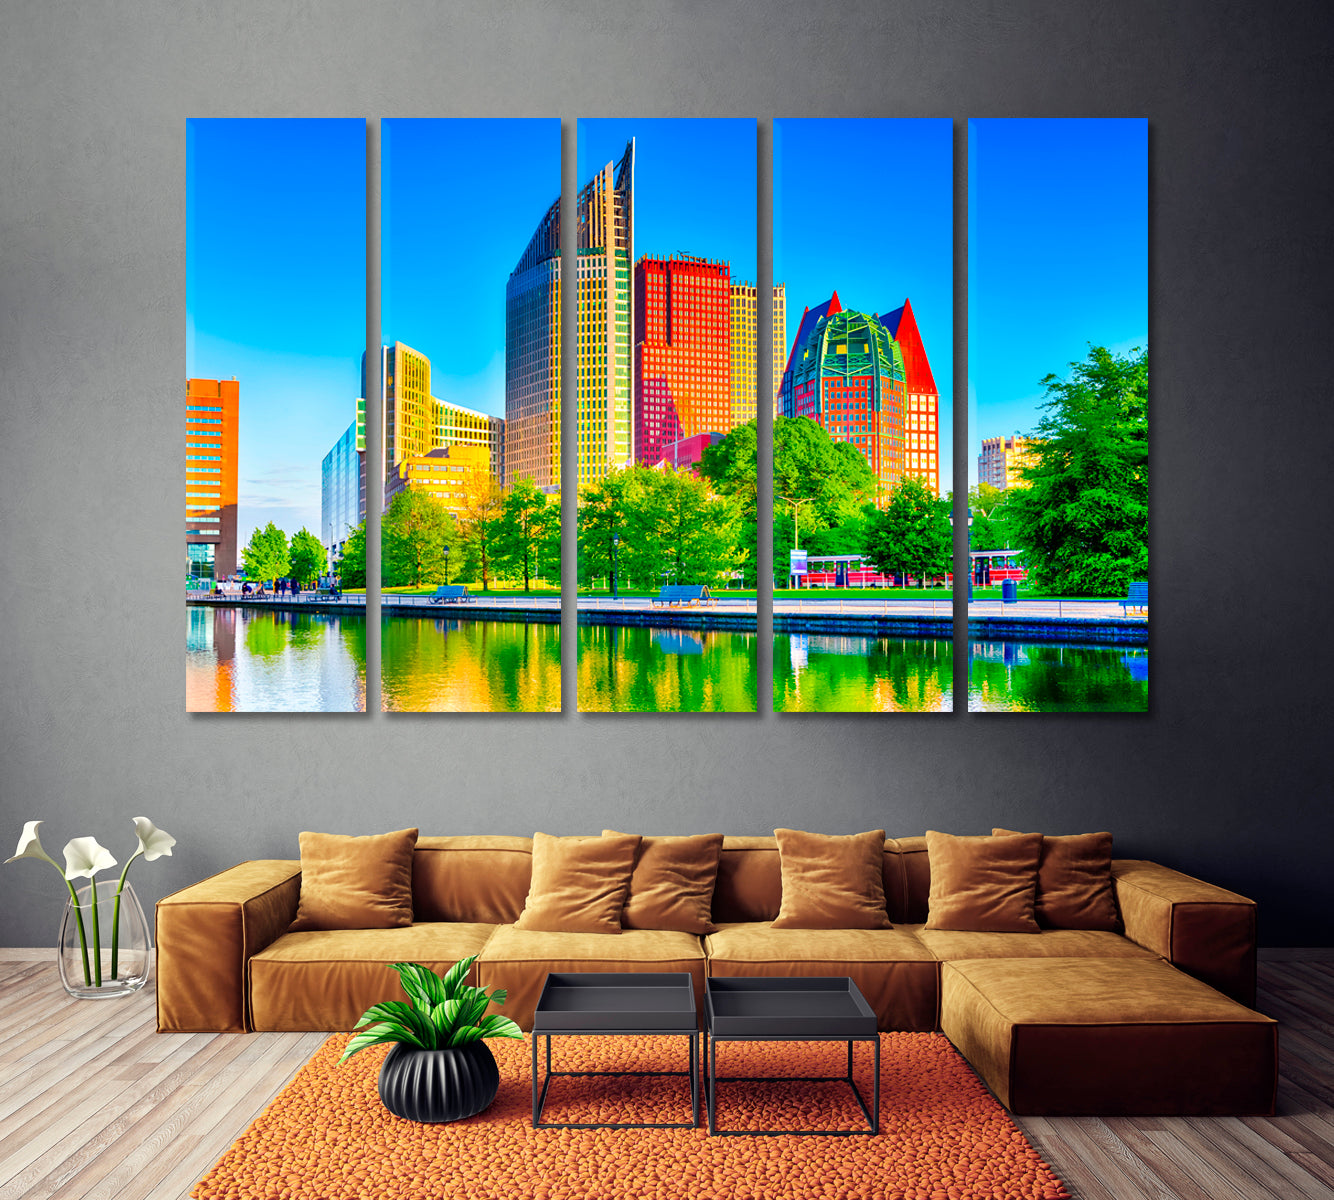 Hague Skyscrapers Skyline at Blue Hour in Netherlands Canvas Print ArtLexy   